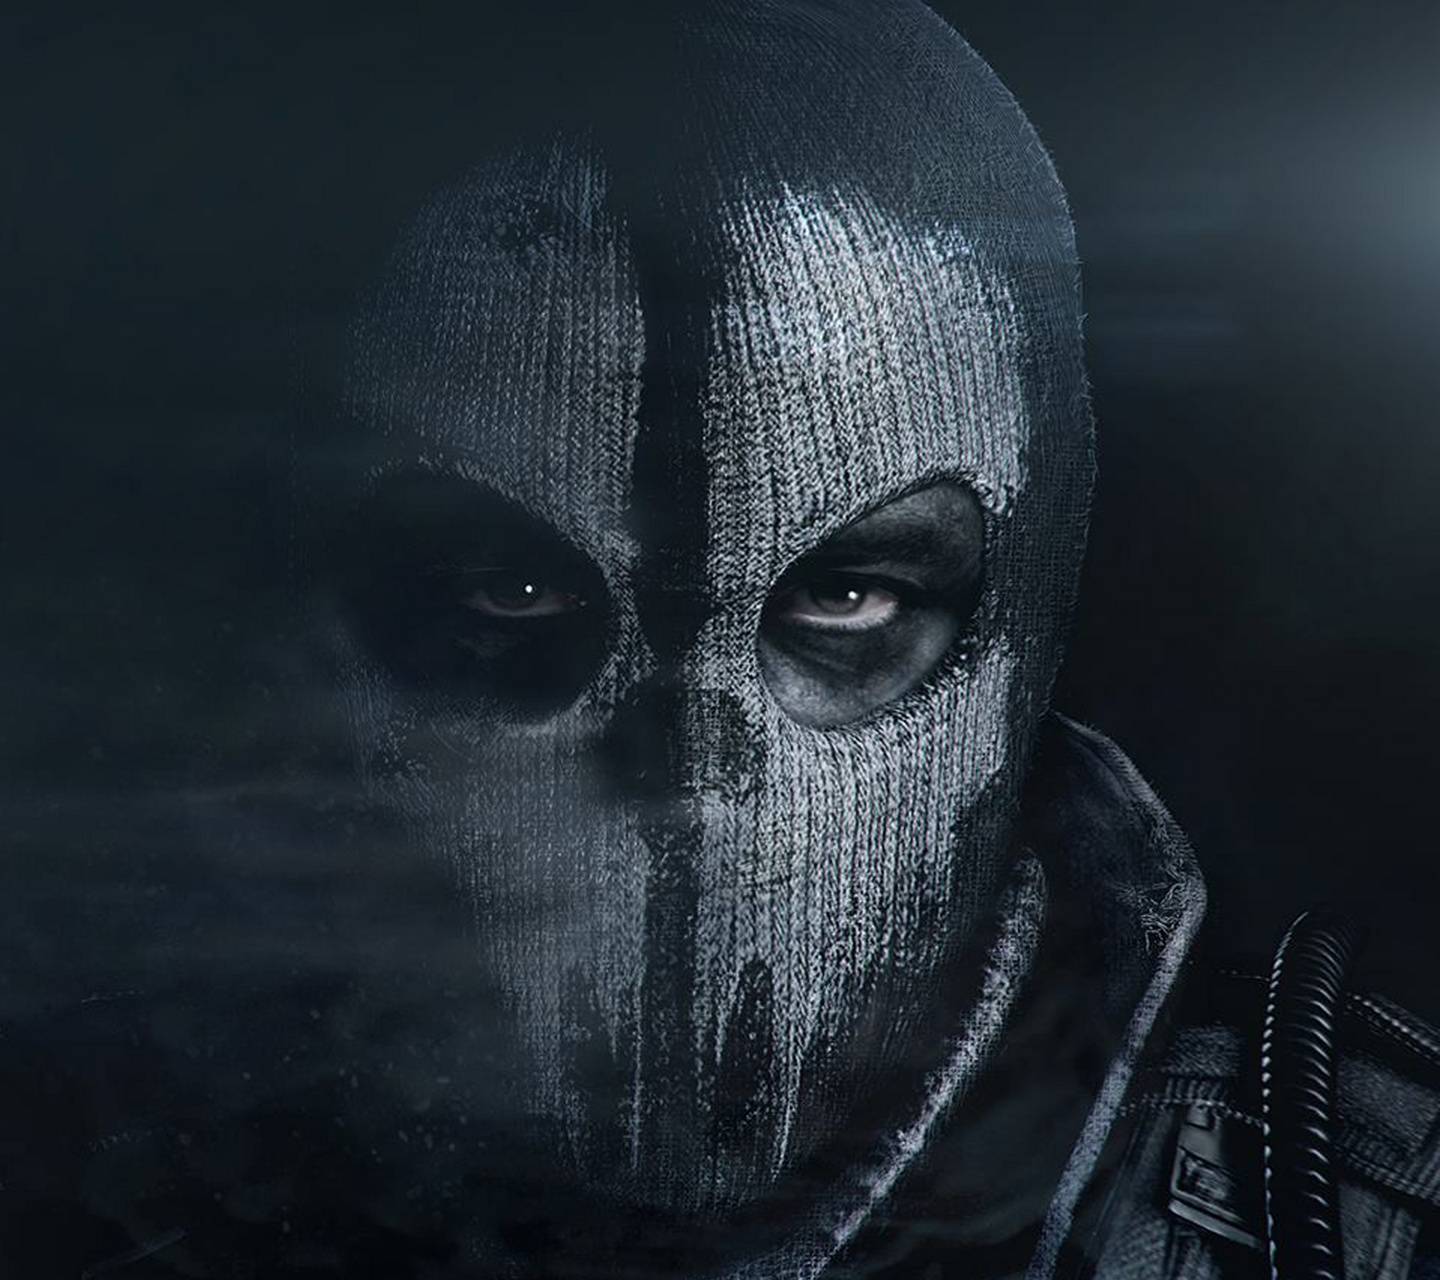 Call Of Duty Ghosts wallpaper